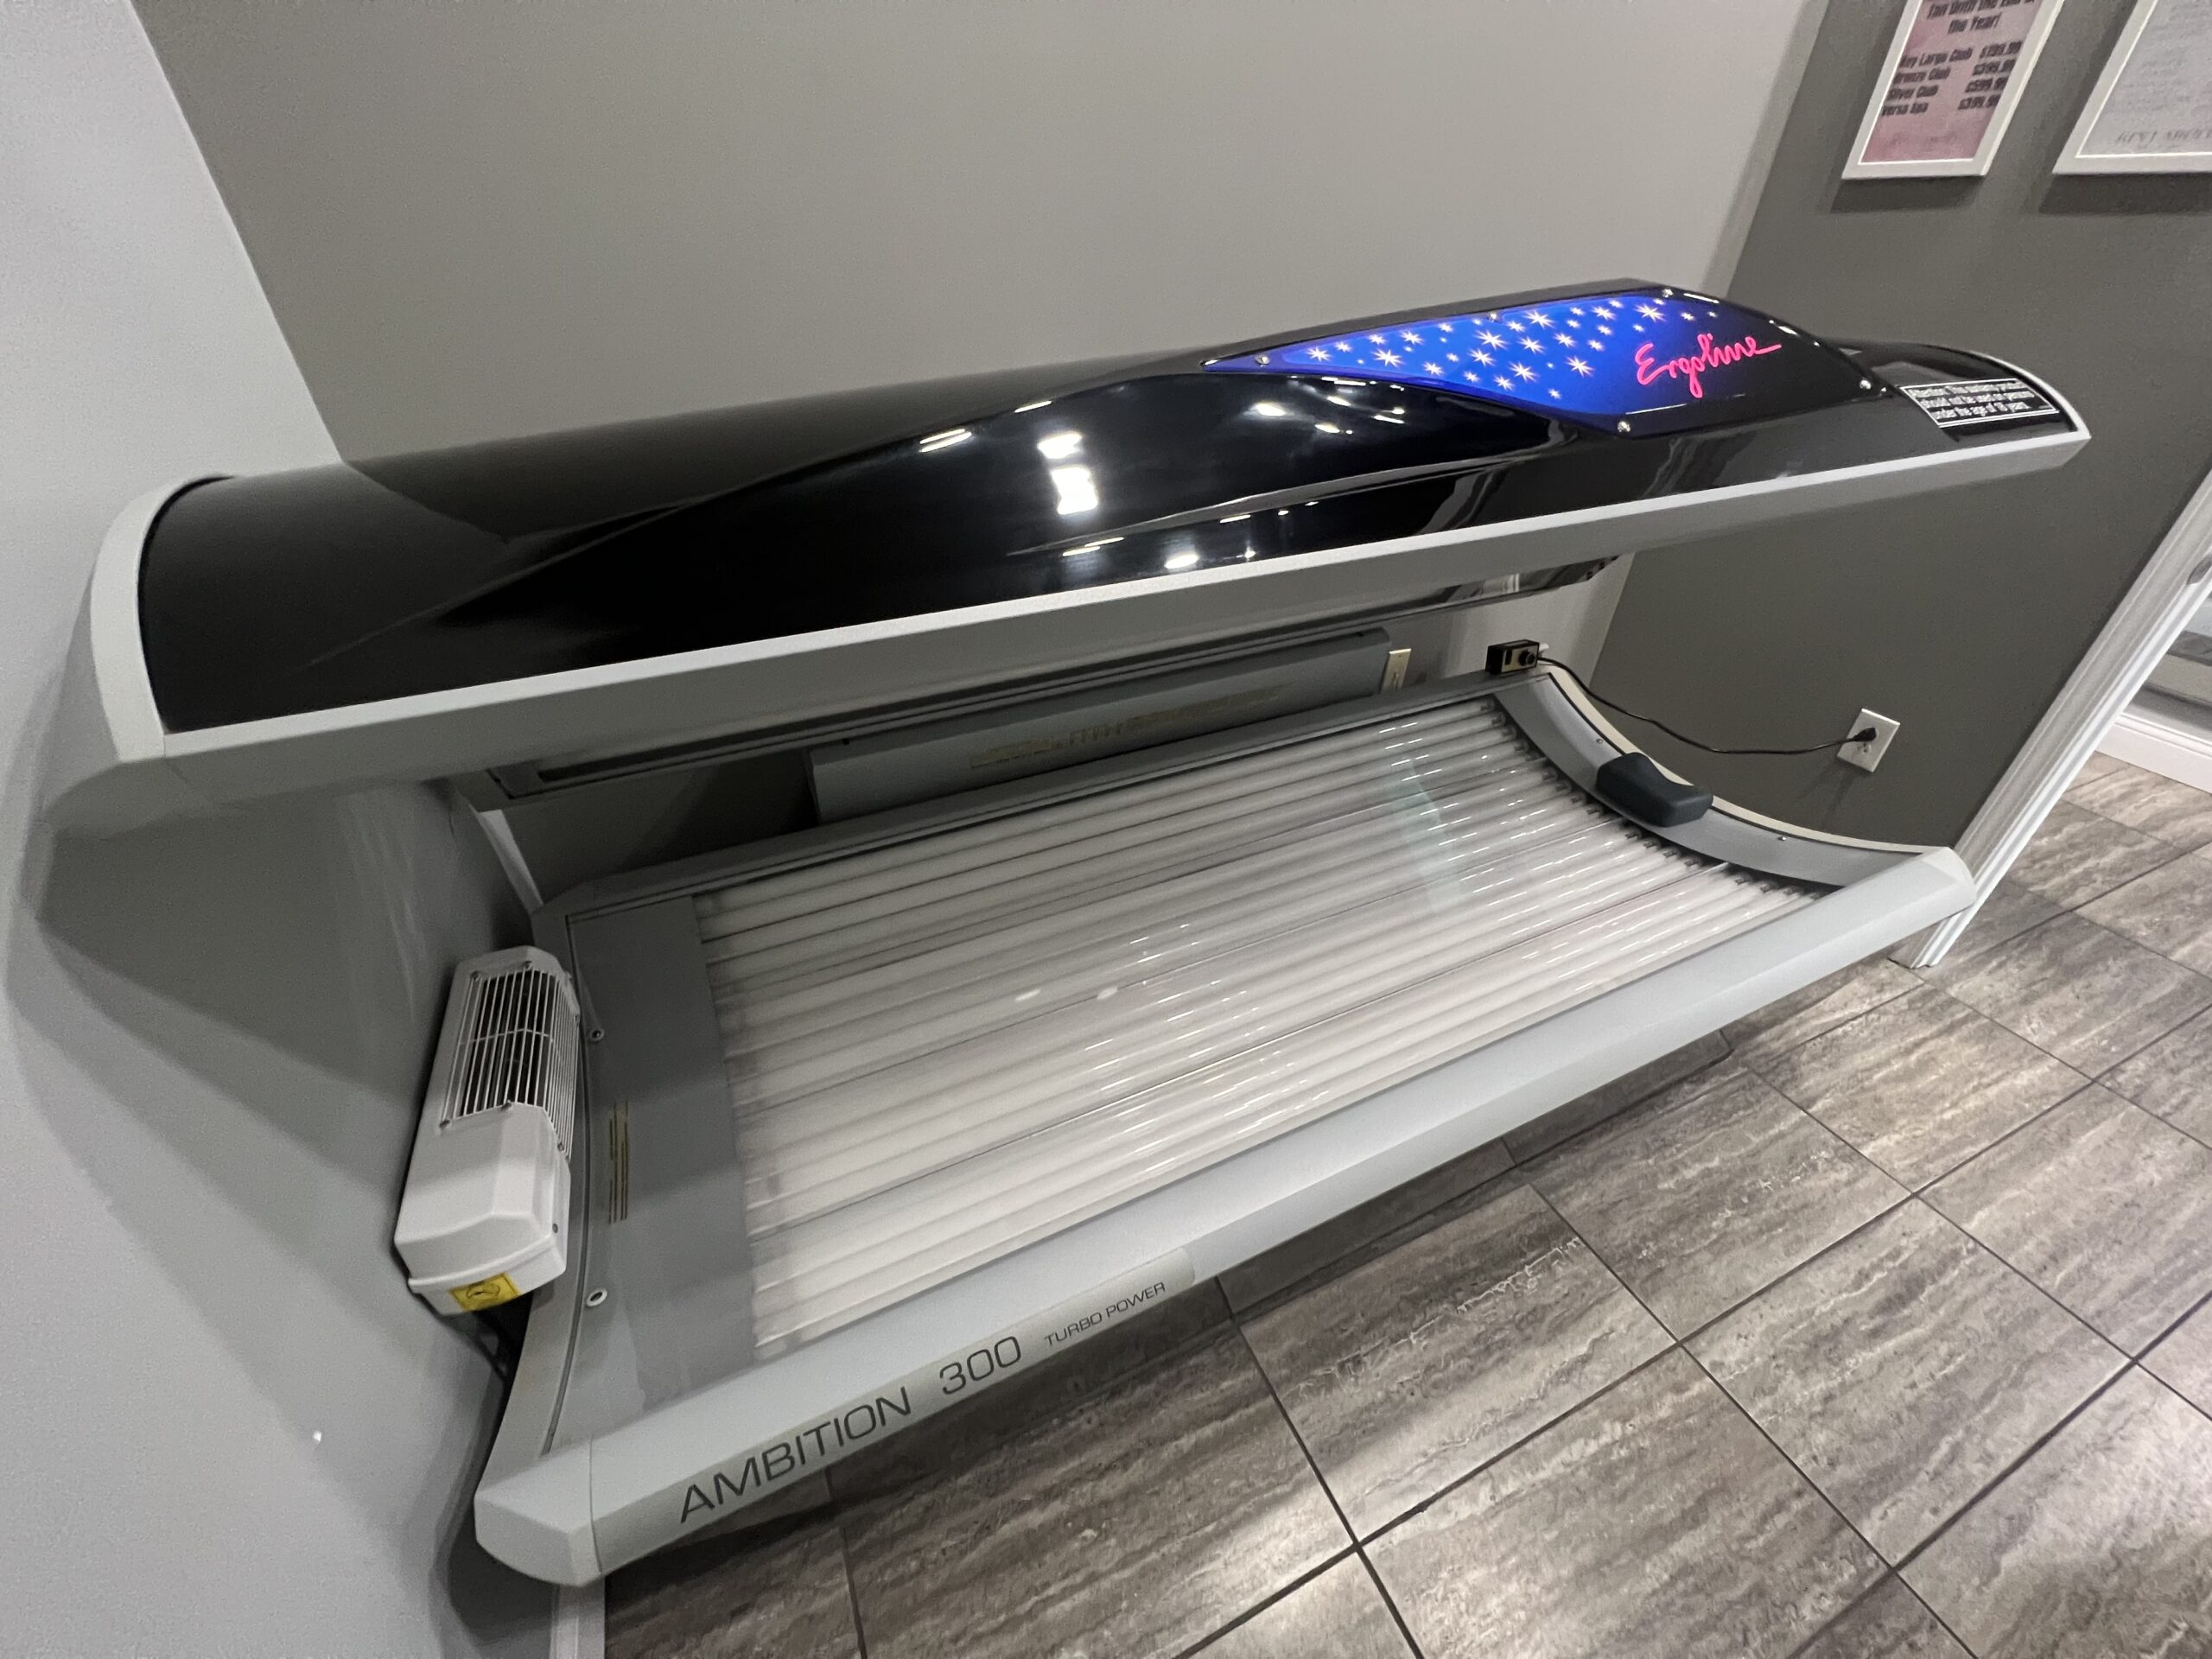 Advanced Ergoline Ambition 300 Turbo Power tanning bed at Key Largo Tan & Spa, East Alton, IL, combining technology and comfort for ideal tanning.